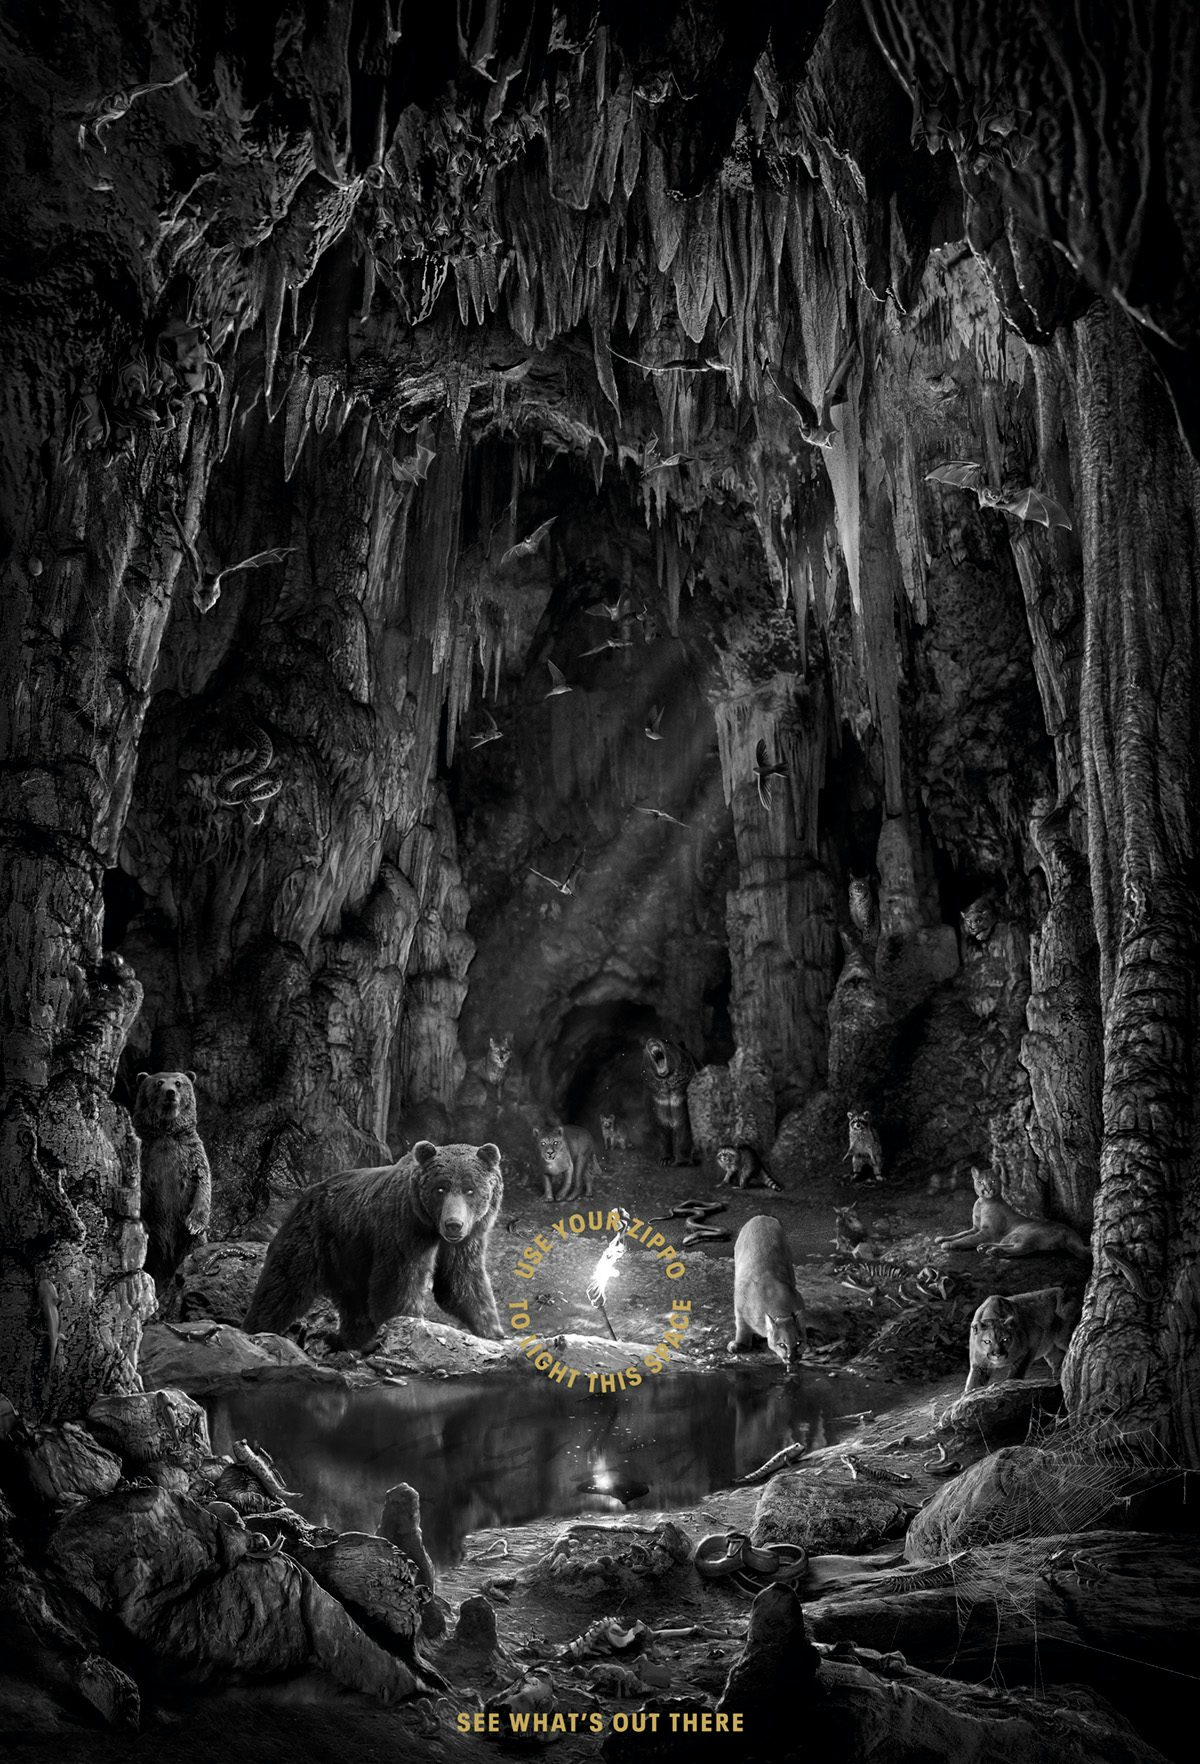 Black and white poster created for Zippo showing a cave scene including a bear and other wildlife